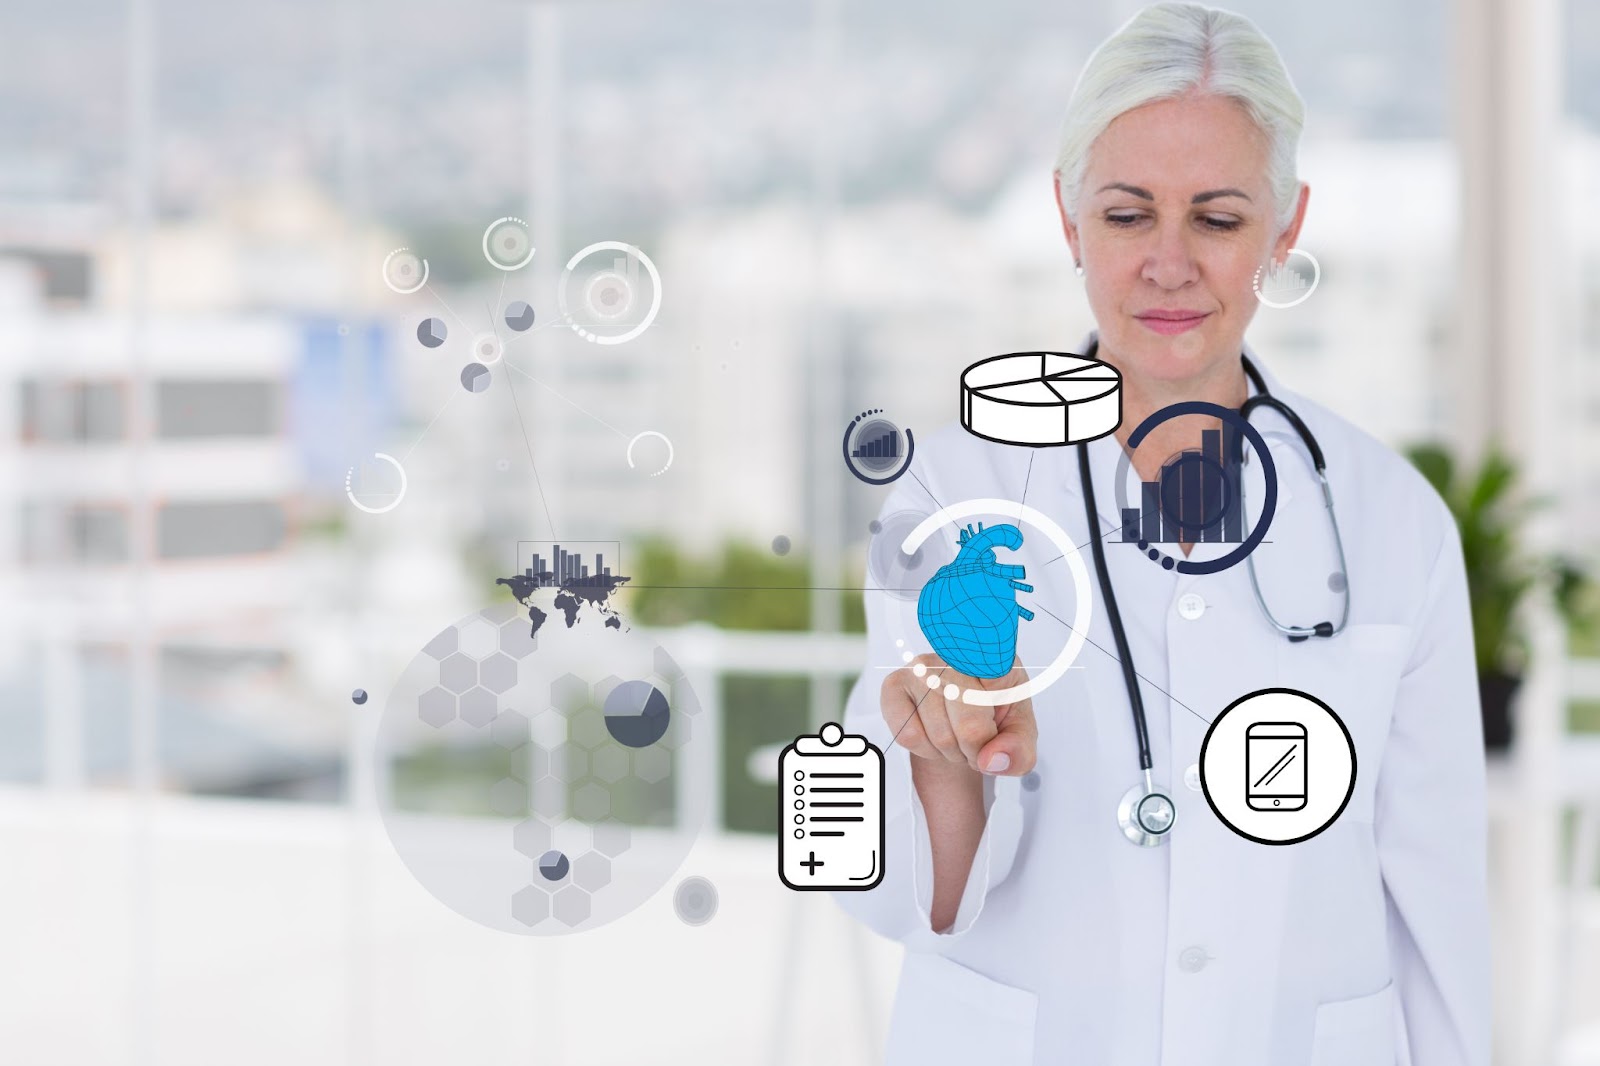 IoT applications in healthcare have elevated this industry to new heights